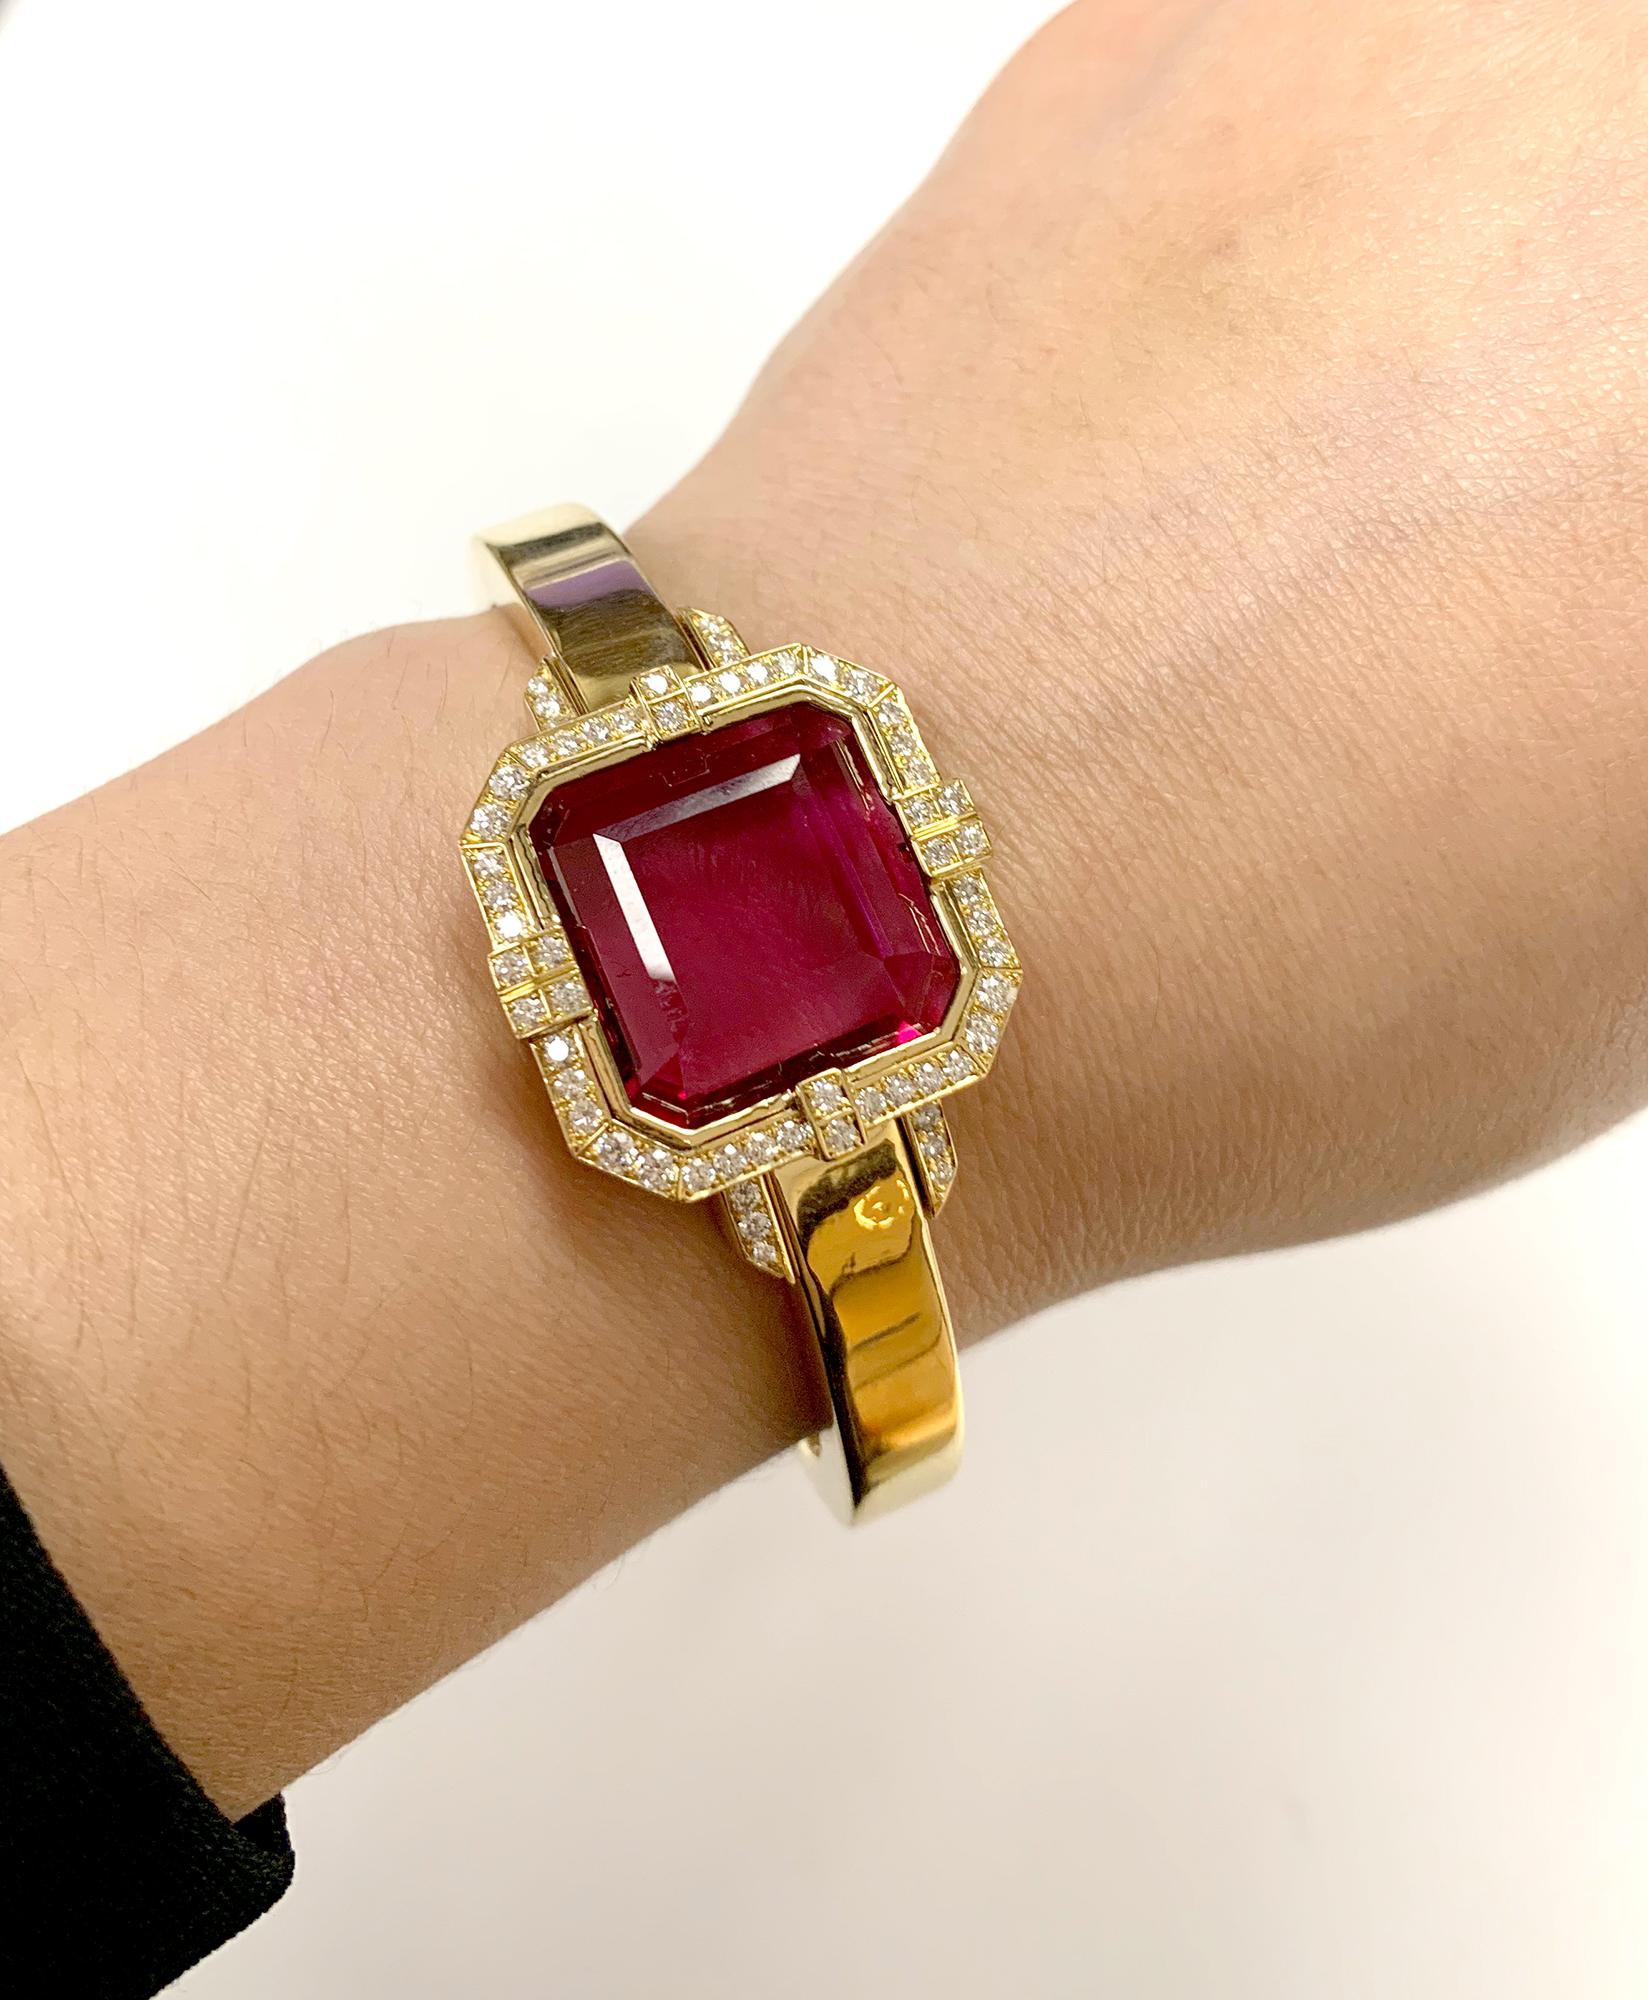 This Rubelite Emerald Cut Cuff with Diamonds in 18K Yellow Gold is a stunning piece of jewelry from the 'G-One' Collection. This cuff bracelet features a large, square emerald-cut Rubelite gemstone set in 18K yellow gold, surrounded by a halo of